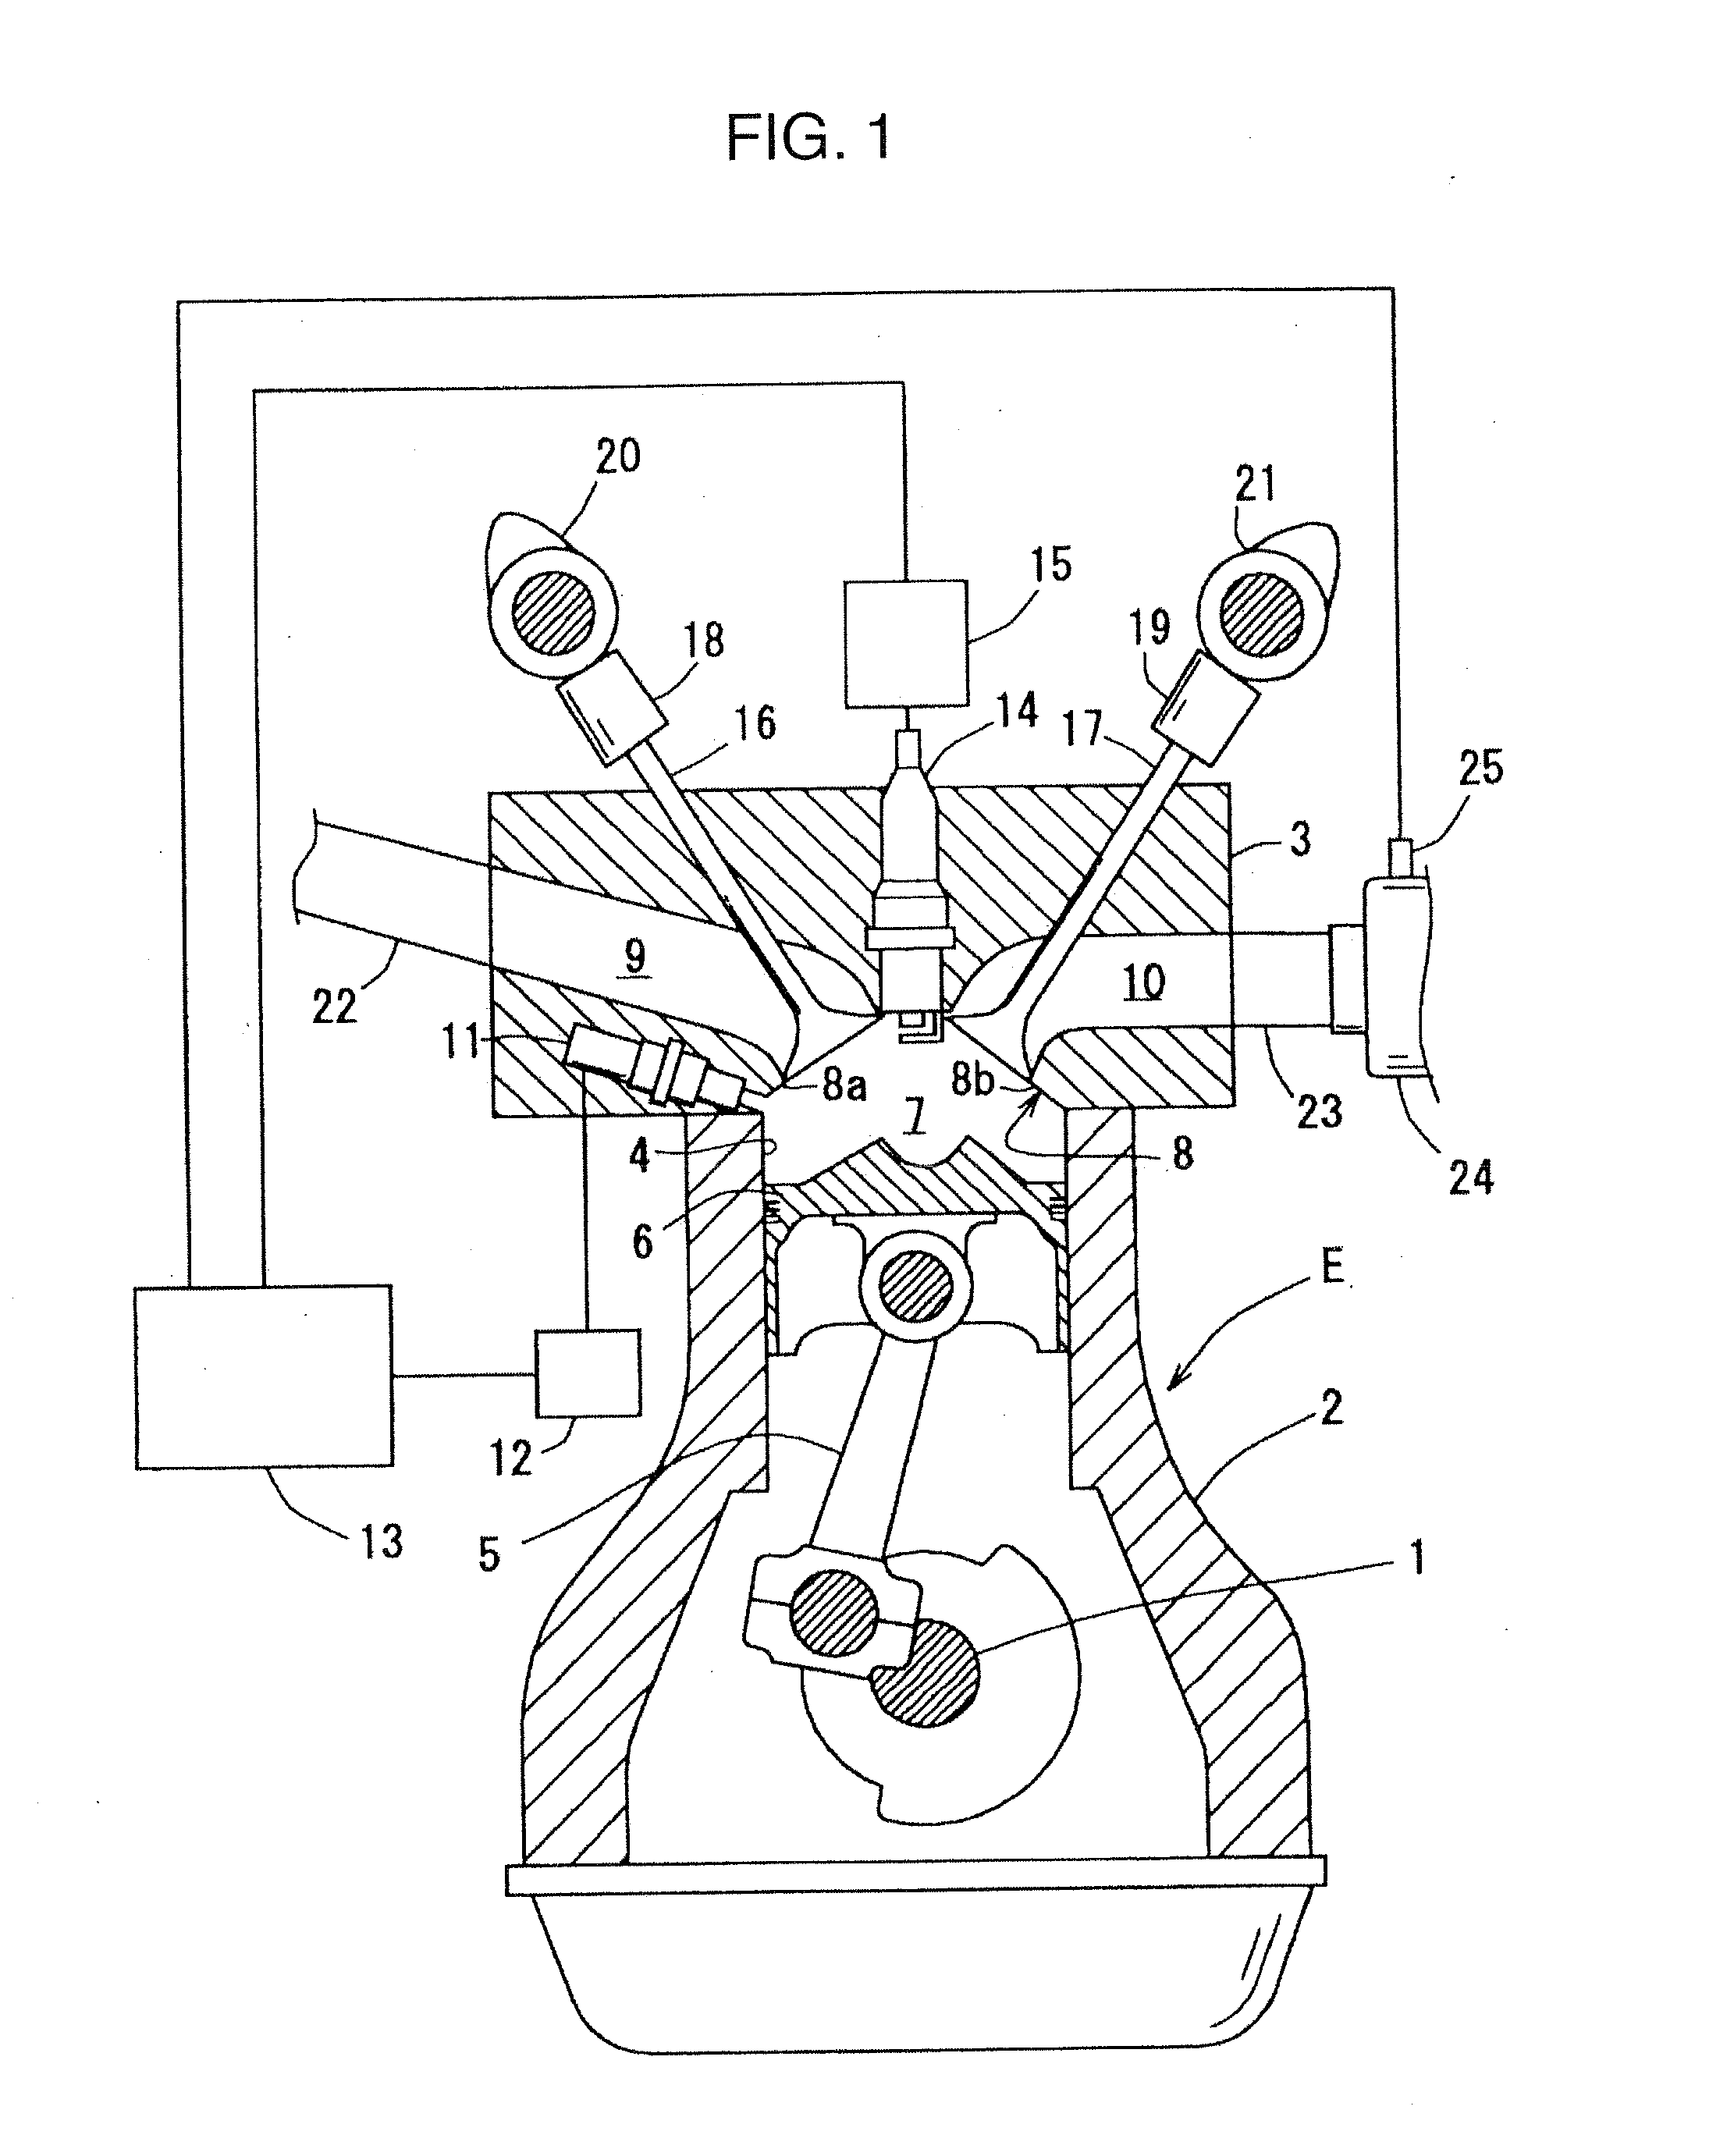 Direct-injection spark-ignition engine